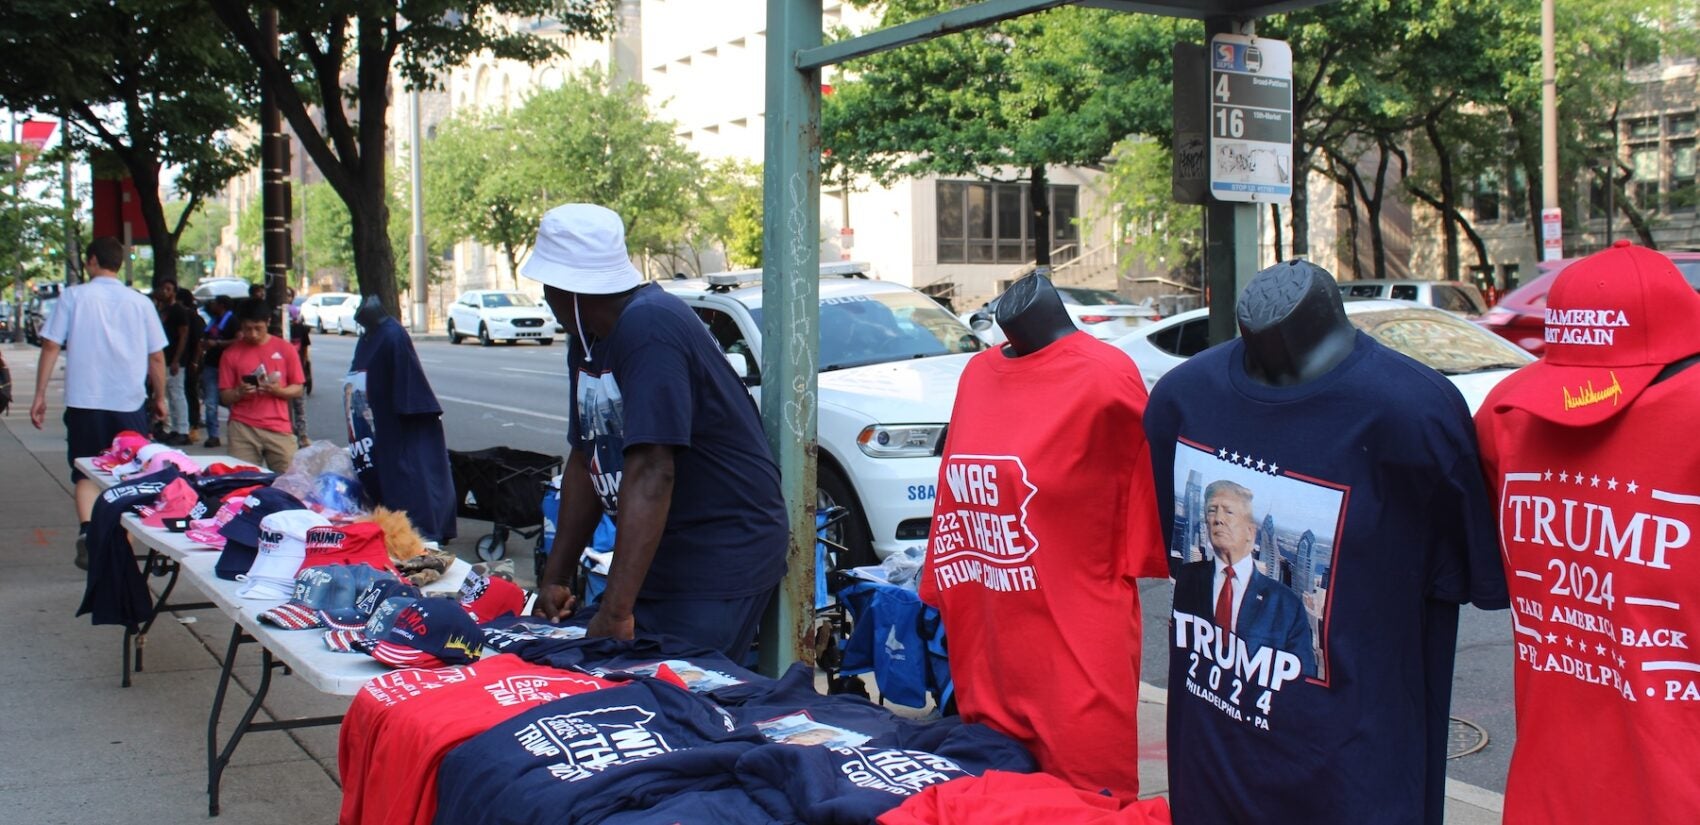 Trump merchandise for sale outside of the rally